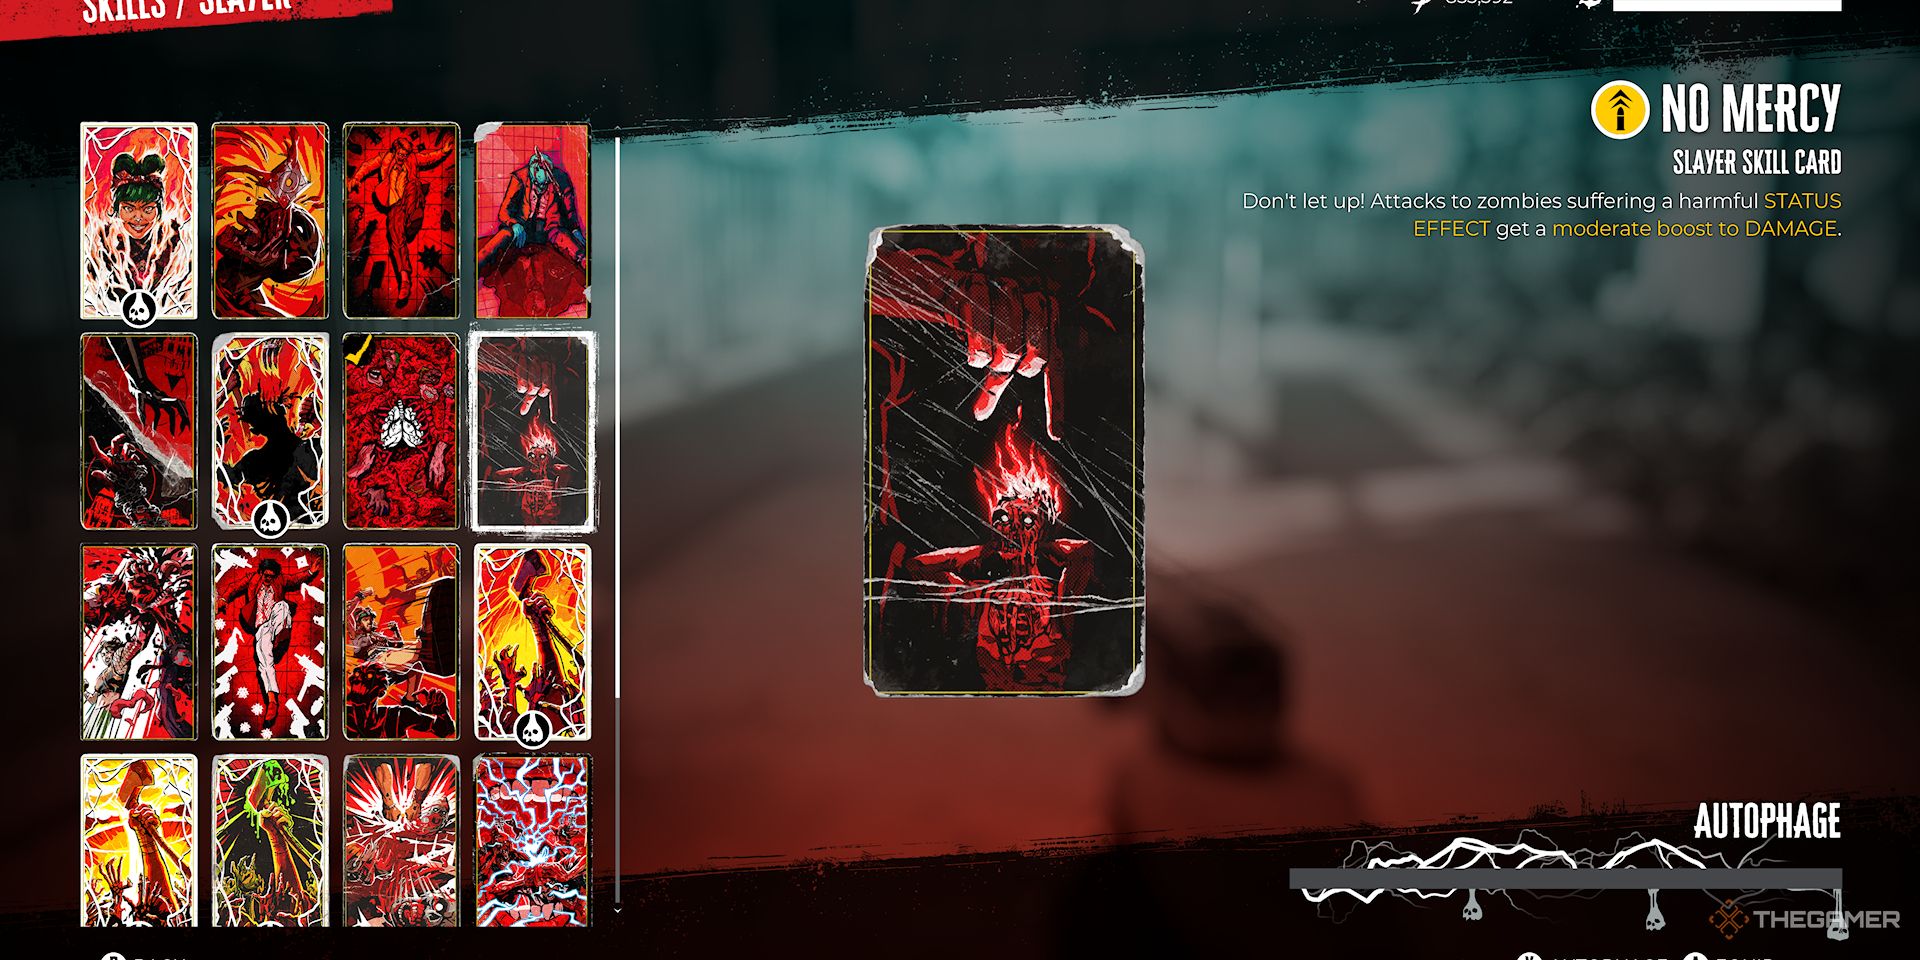 A screenshot of the No Mercy Skill Card in the inventory of Dead Island 2.